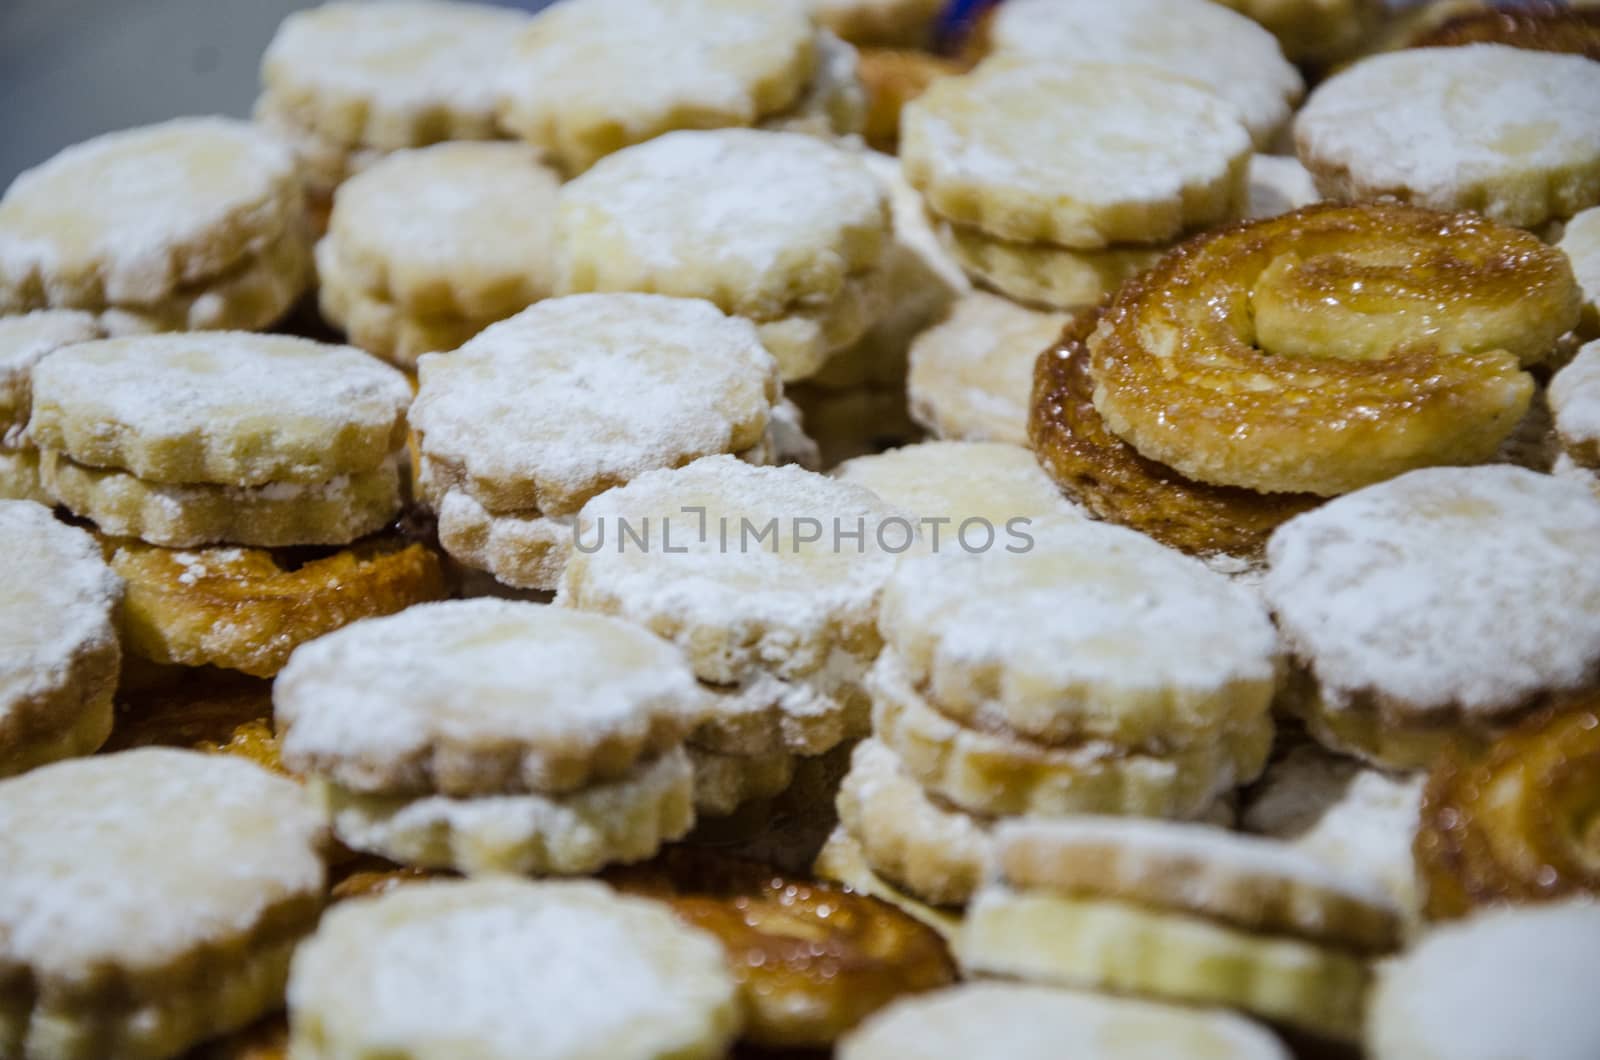 Many alfajores stuffed with white delicacy